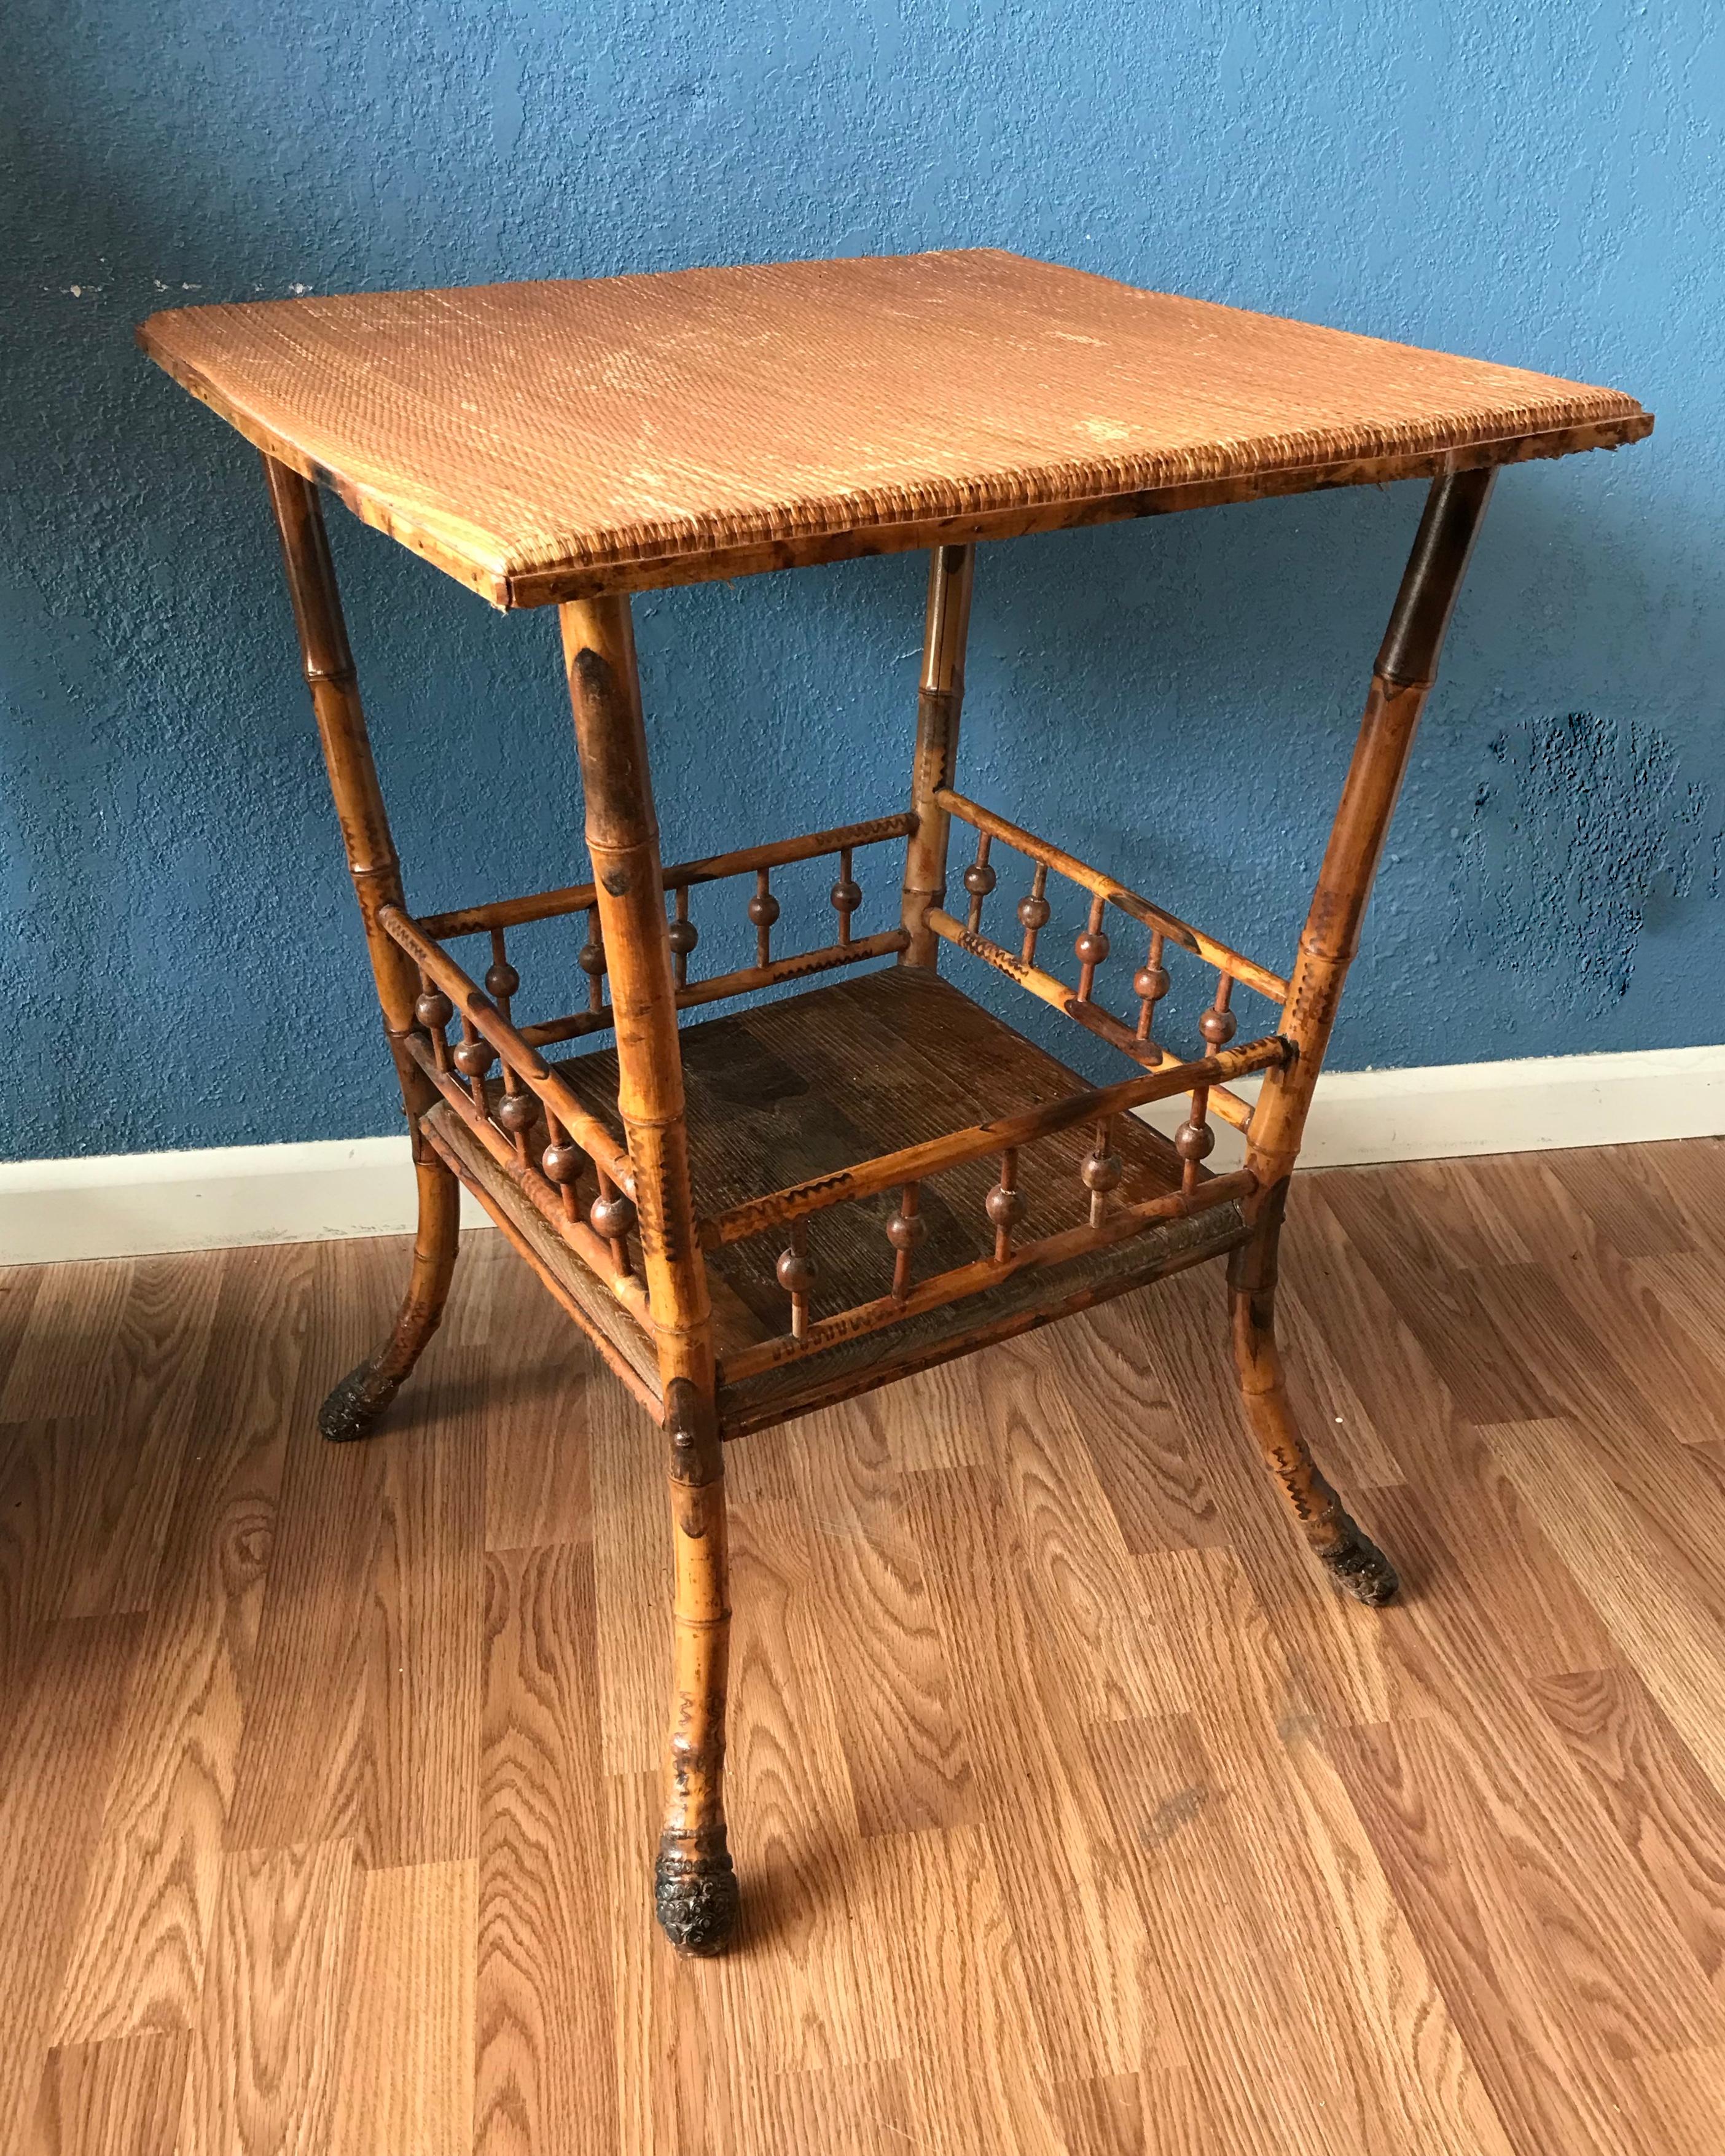 An outstanding table generously scaled
and finished with a grasss cloth top. The
table is accented with a gallery framed
bottom shelf. It is appointed with dramatic
root feet. The bottom shelf is oak.